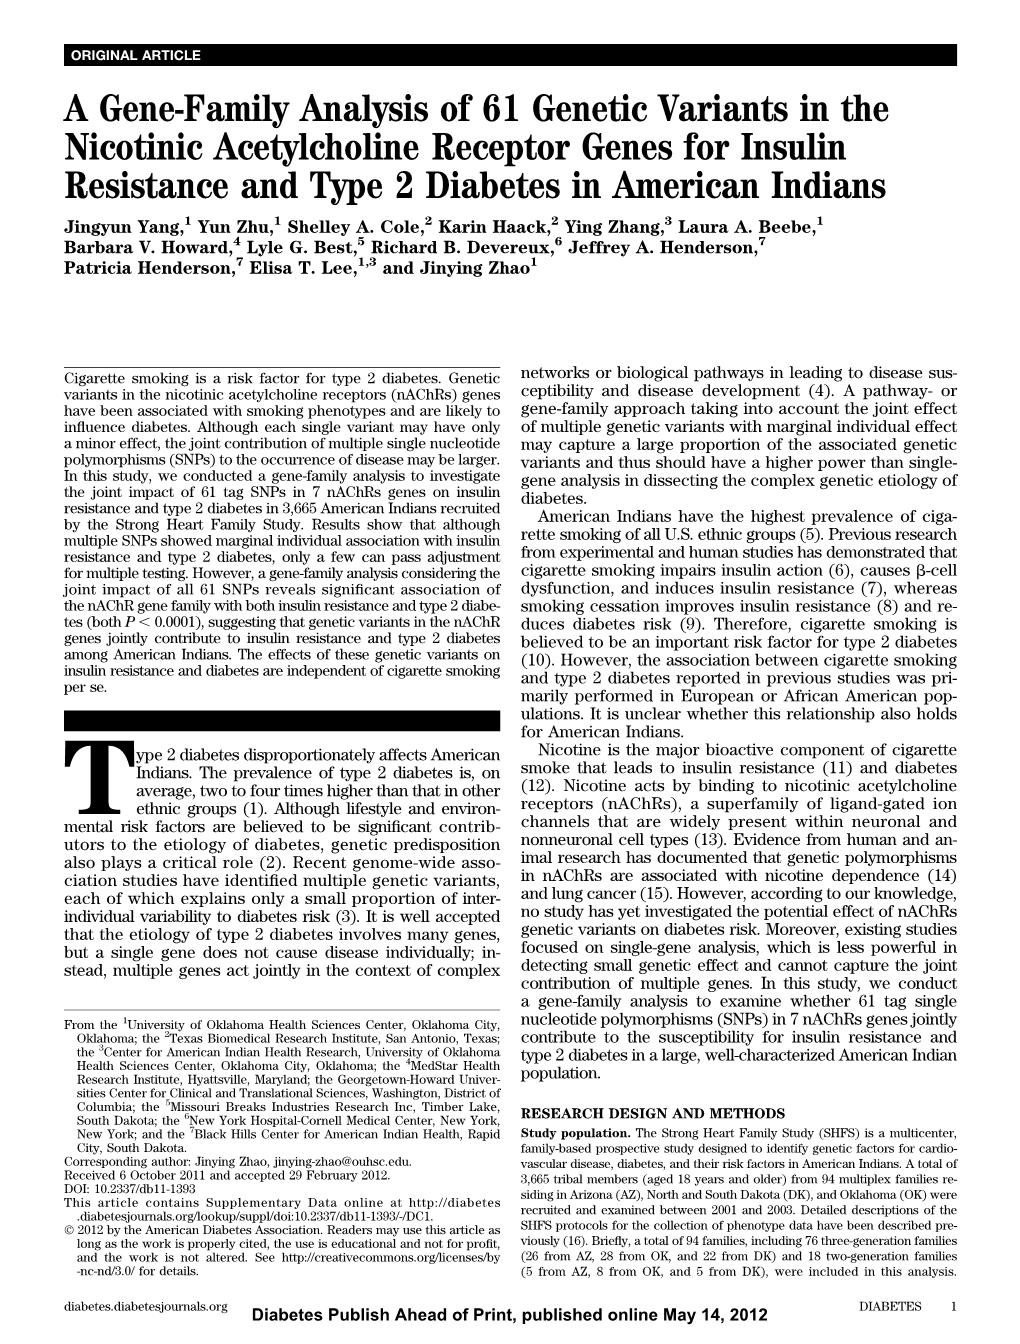 A Gene-Family Analysis of 61 Genetic Variants in the Nicotinic Acetylcholine Receptor Genes for Insulin Resistance and Type 2 Diabetes in American Indians